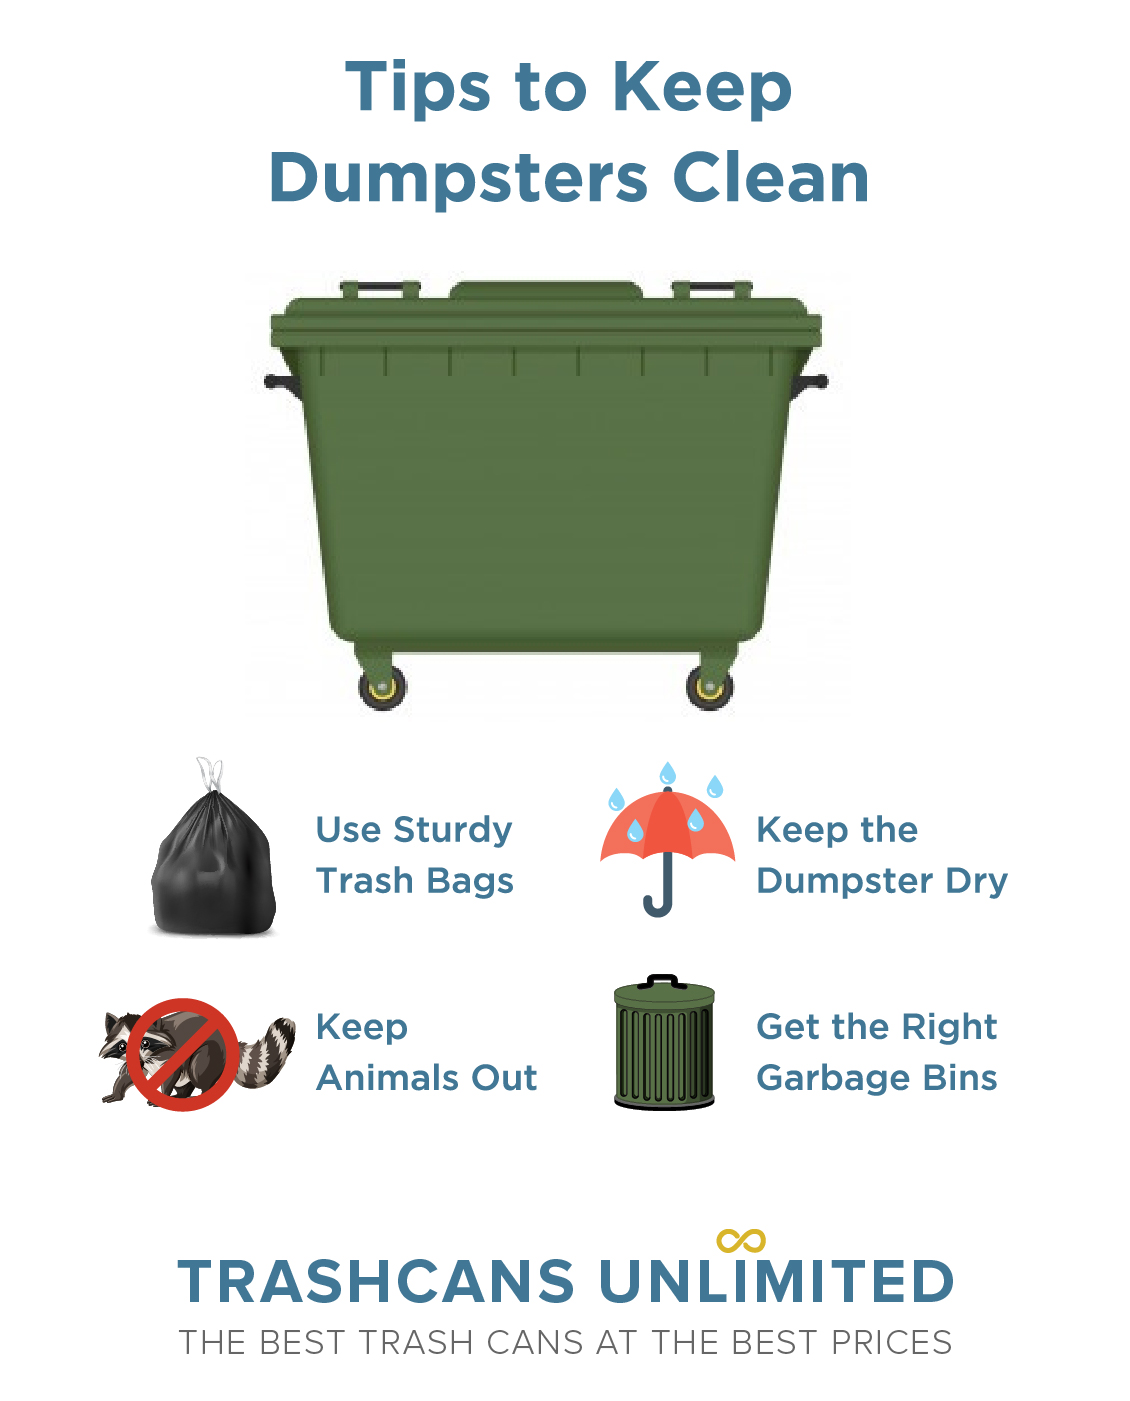 How To Clean Trash Can The Ultimate Guide to Cleaning A Dumpster - Trash Cans Unlimited